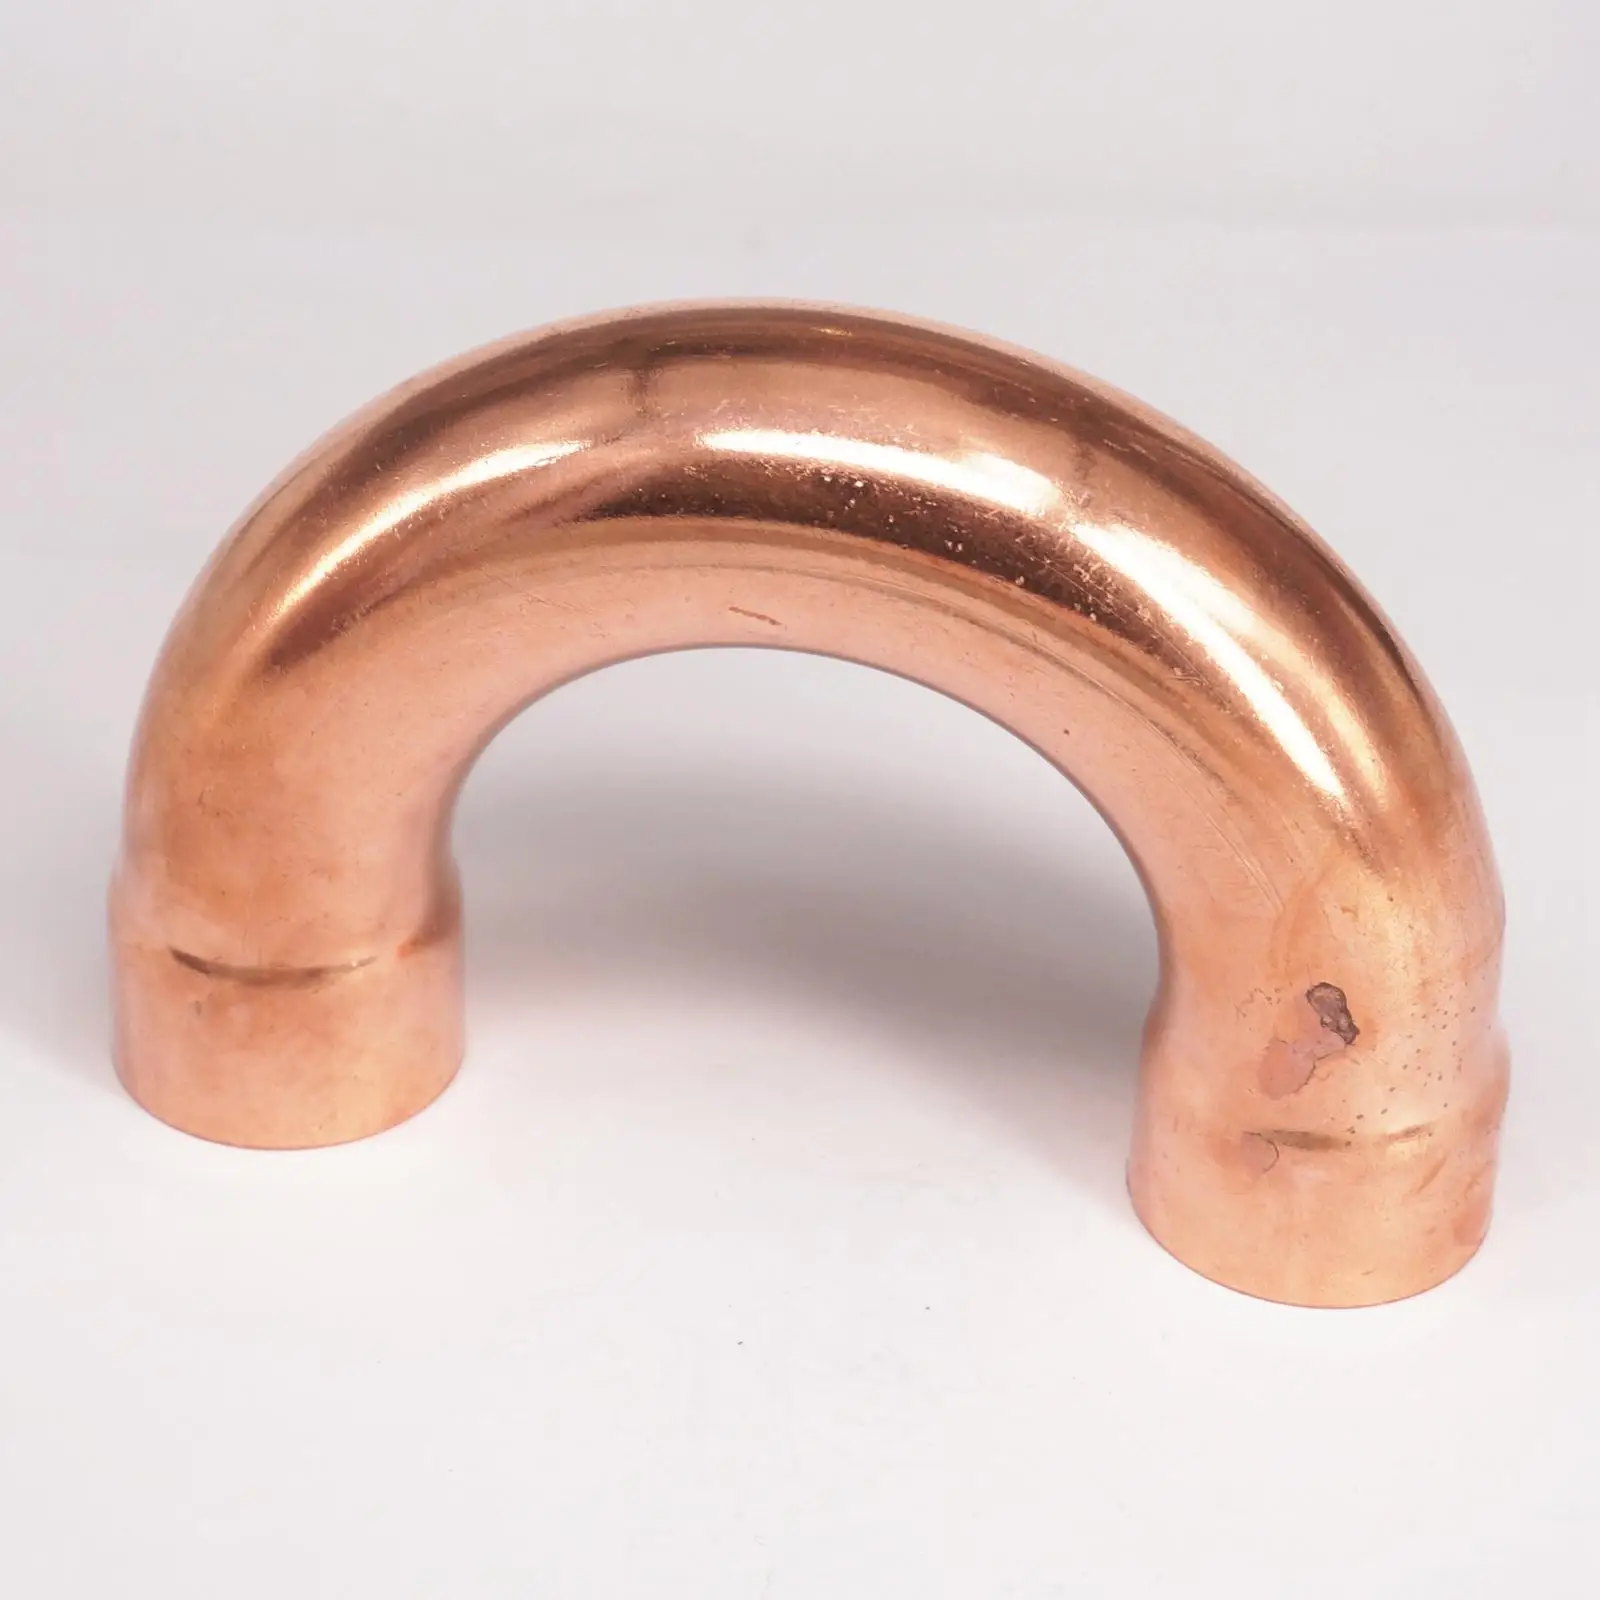 I/D 16-54mm Copper End Feed P Trap Pipe Plumbing Fitting for Gas Water Oil 